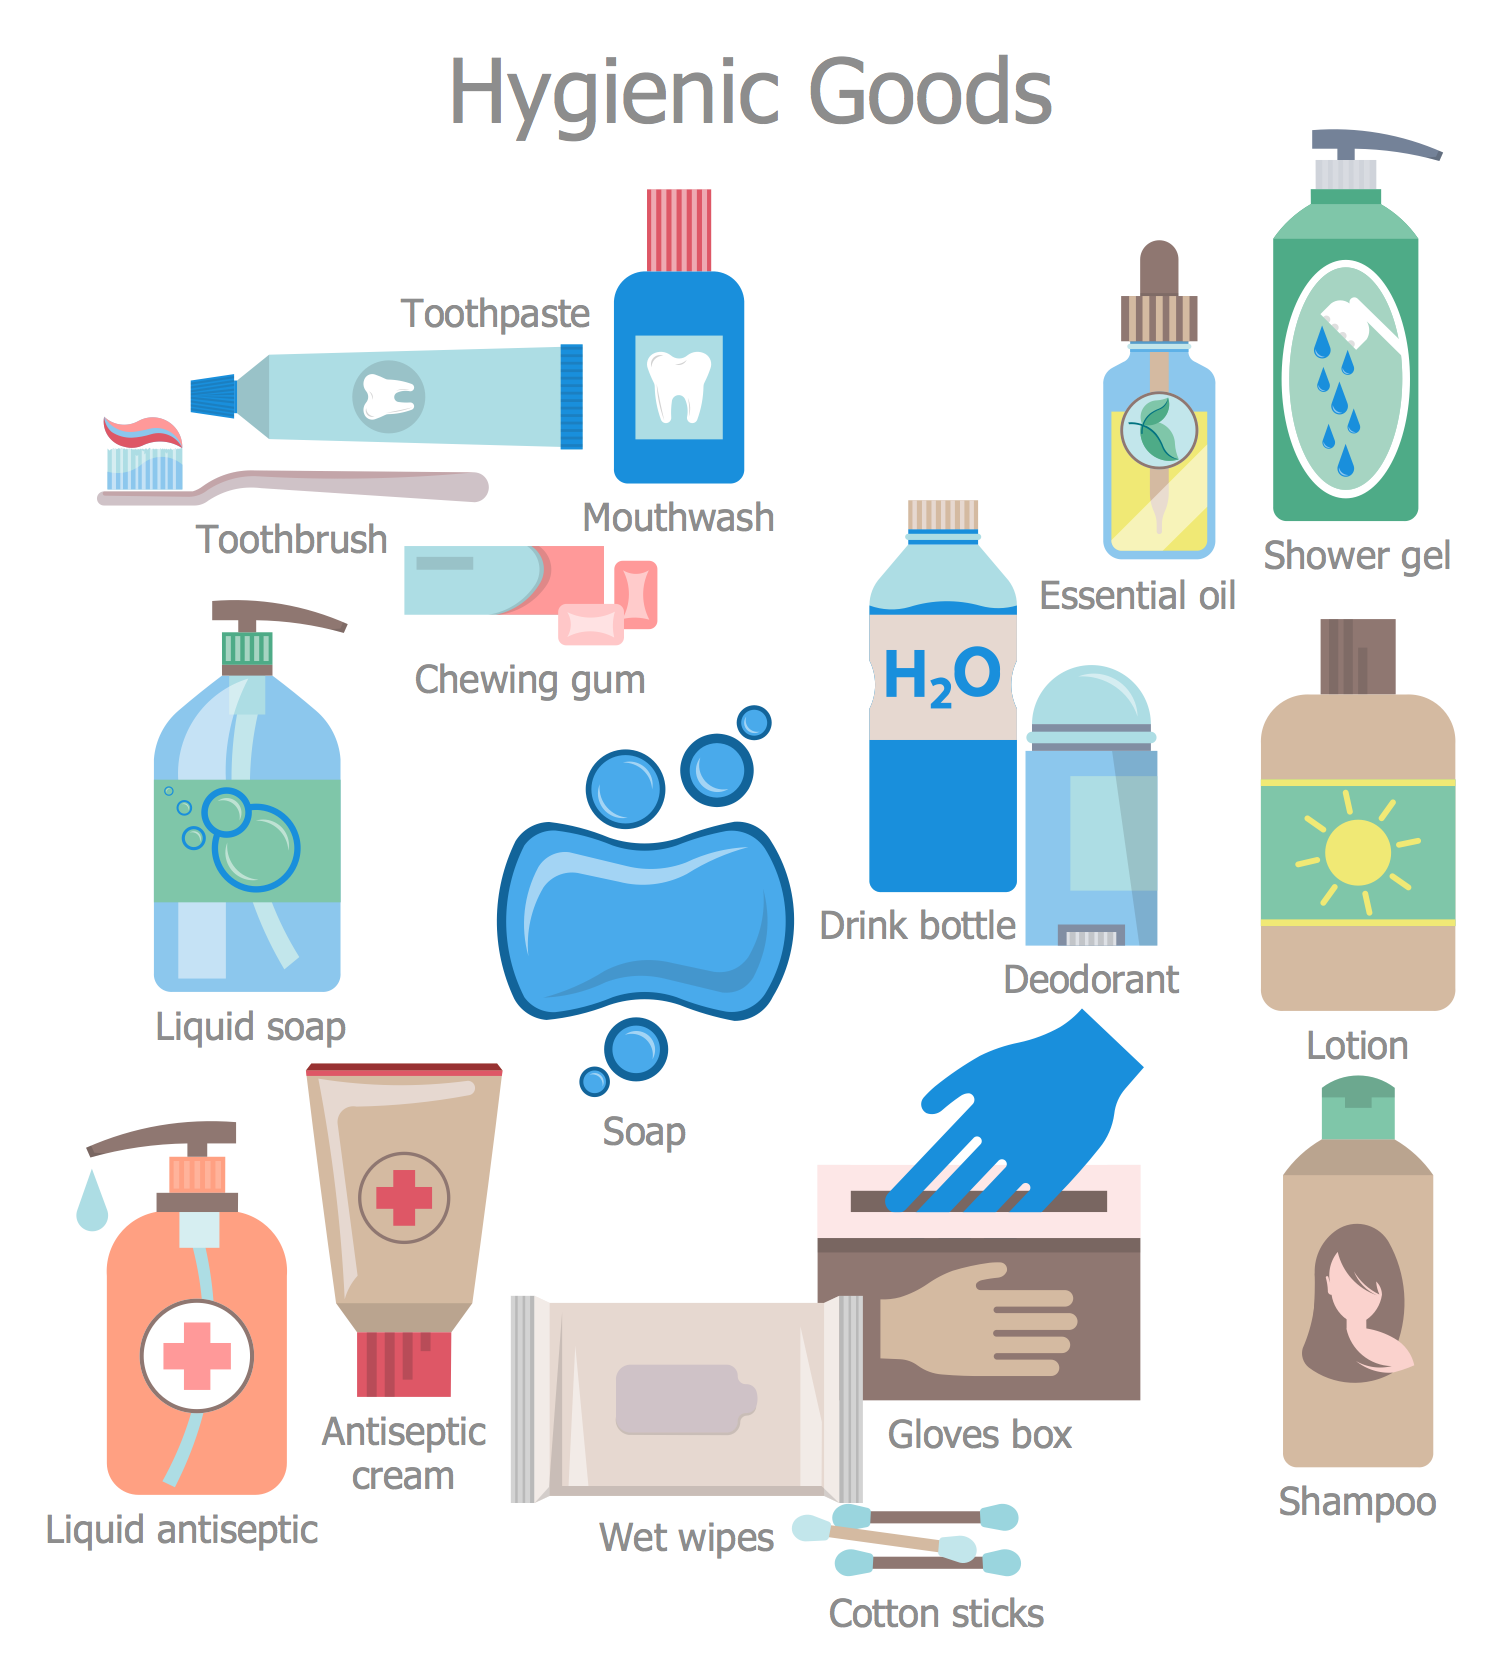 Pharmacy Pictures - Hygienic Goods